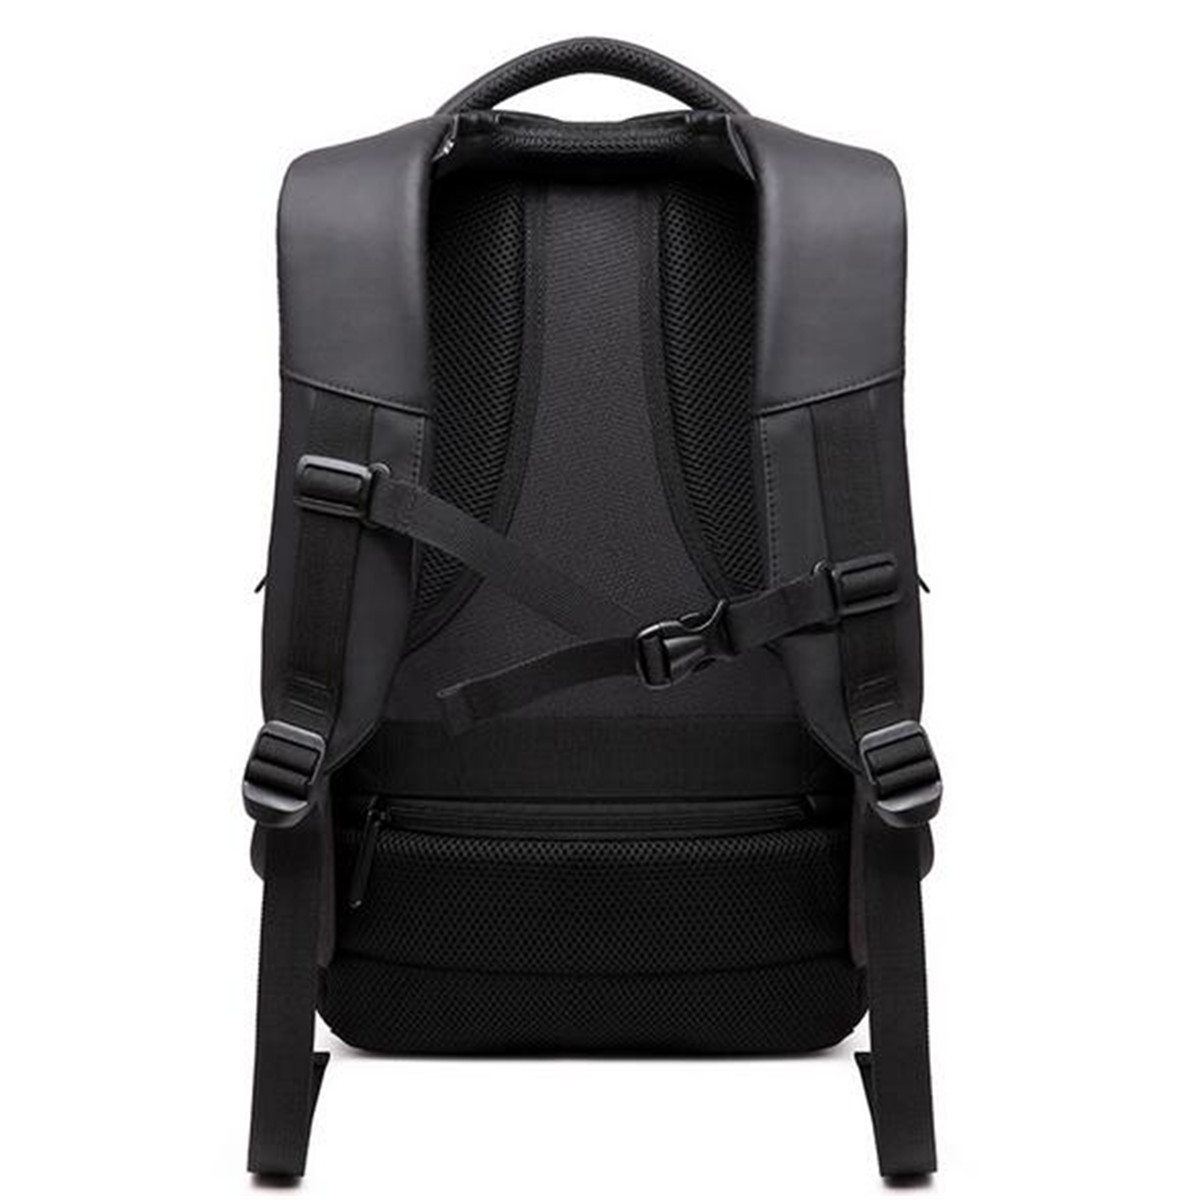 USB-Charge-Anti-theft-Backpack-Laptop-Mens-Backpacks-Outdoor-Travel-Business-Bag-School-Bags-1330618-8